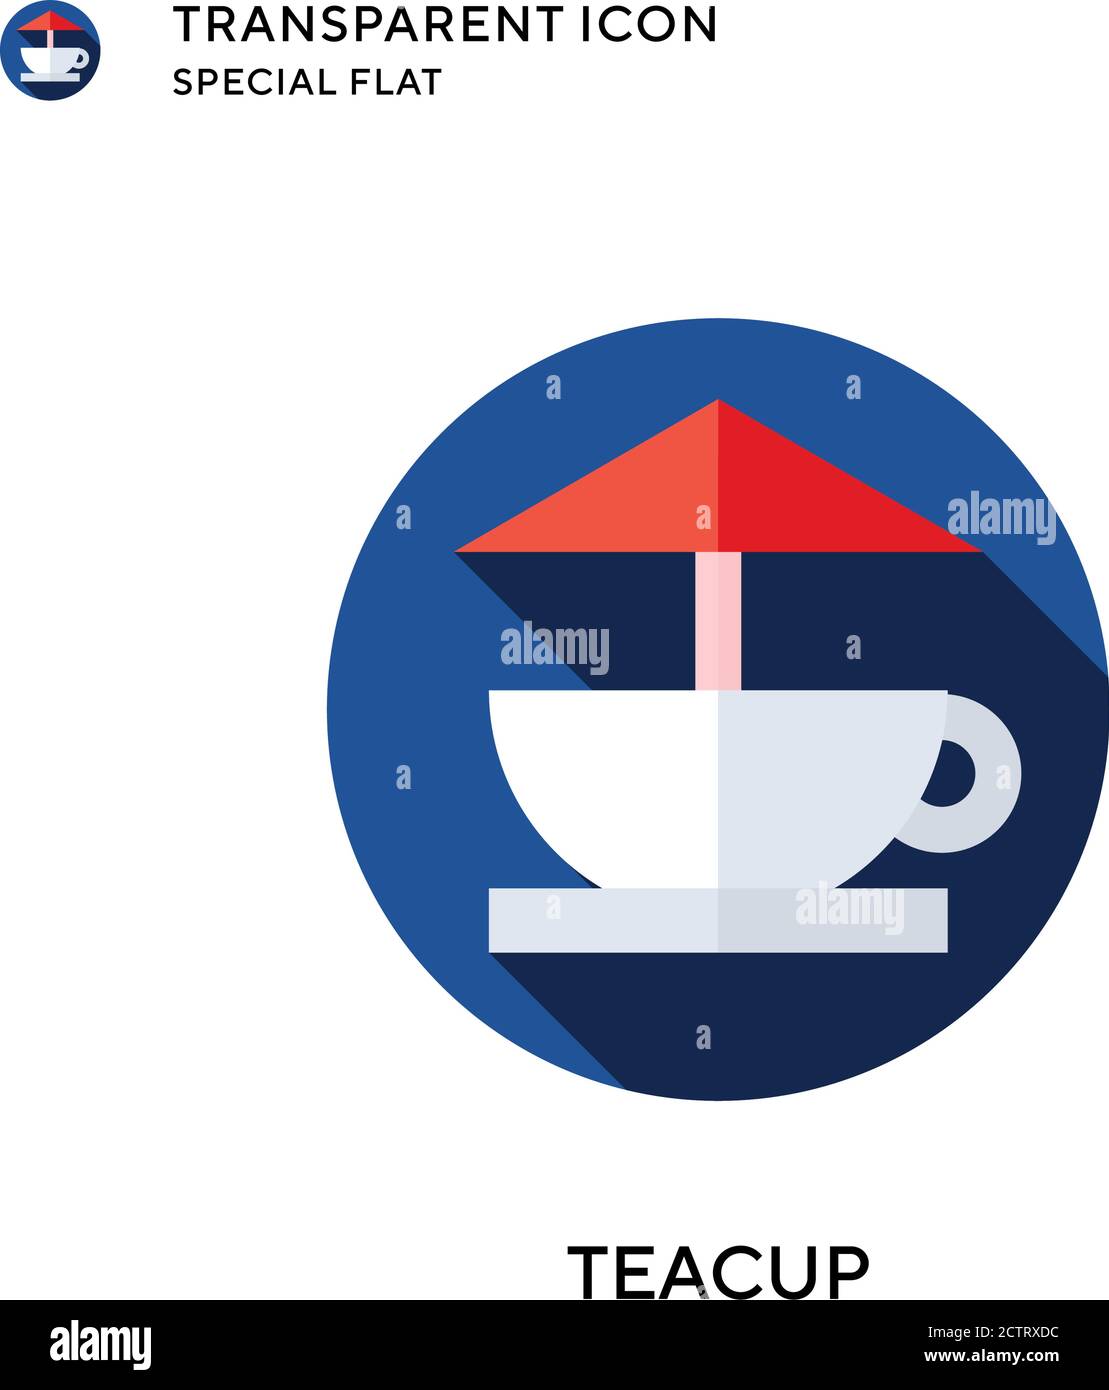 Teacup vector icon. Flat style illustration. EPS 10 vector. Stock Vector